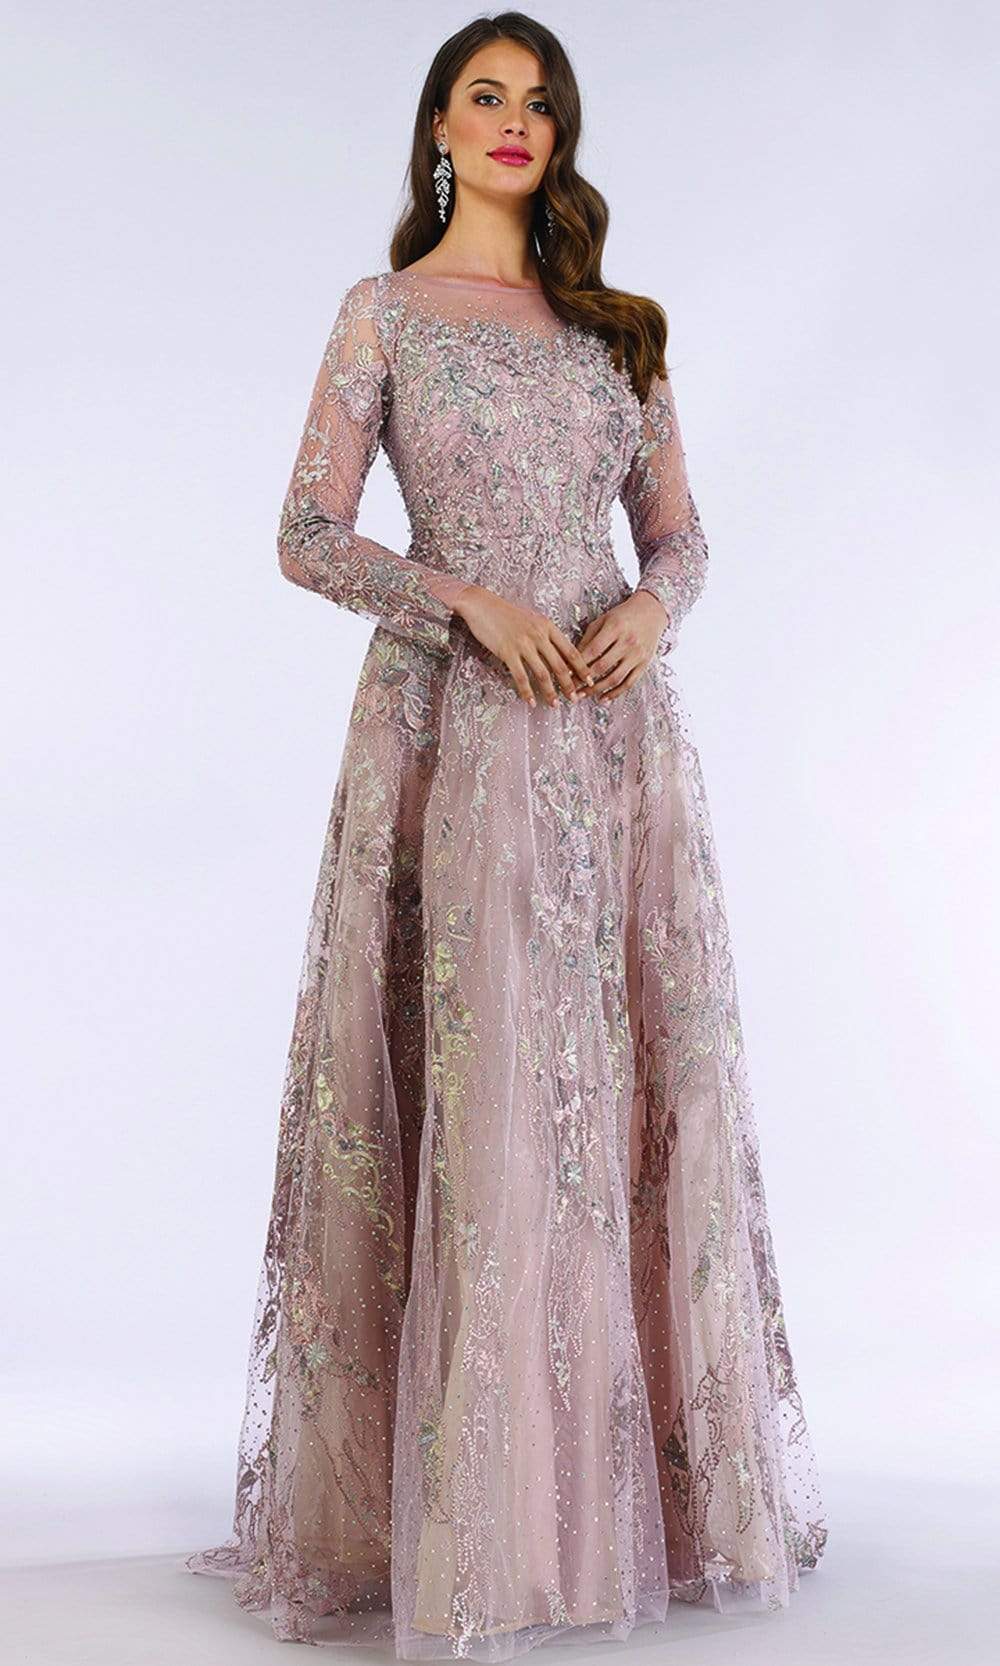 Image of Lara Dresses - 29618 Illusion Long Sleeve Beaded Adorned Evening Gown